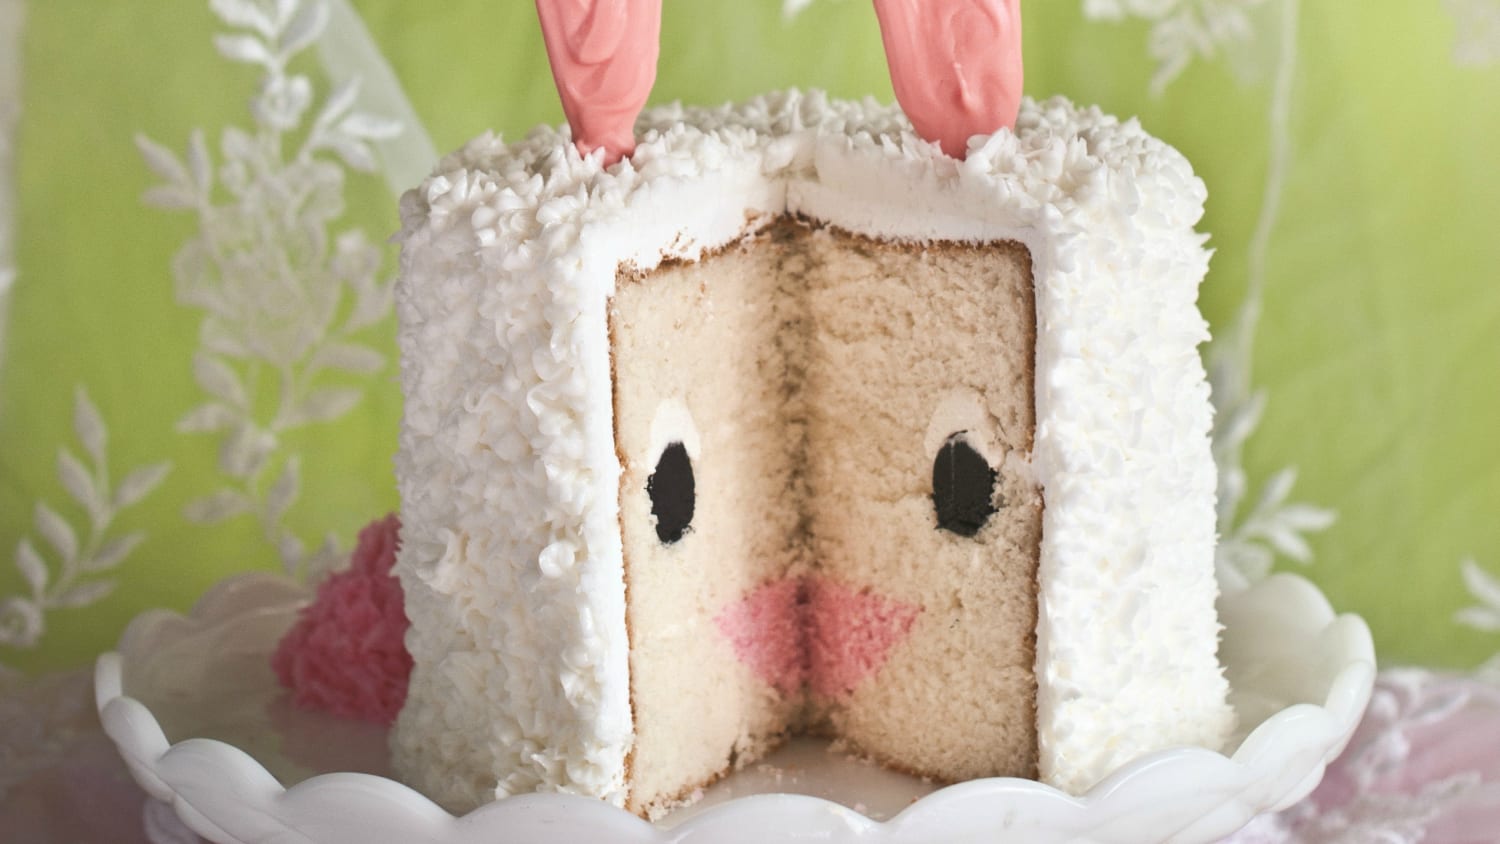 50 Best Easter Cake Recipes — Easy Ideas for Decorating Easter Cakes